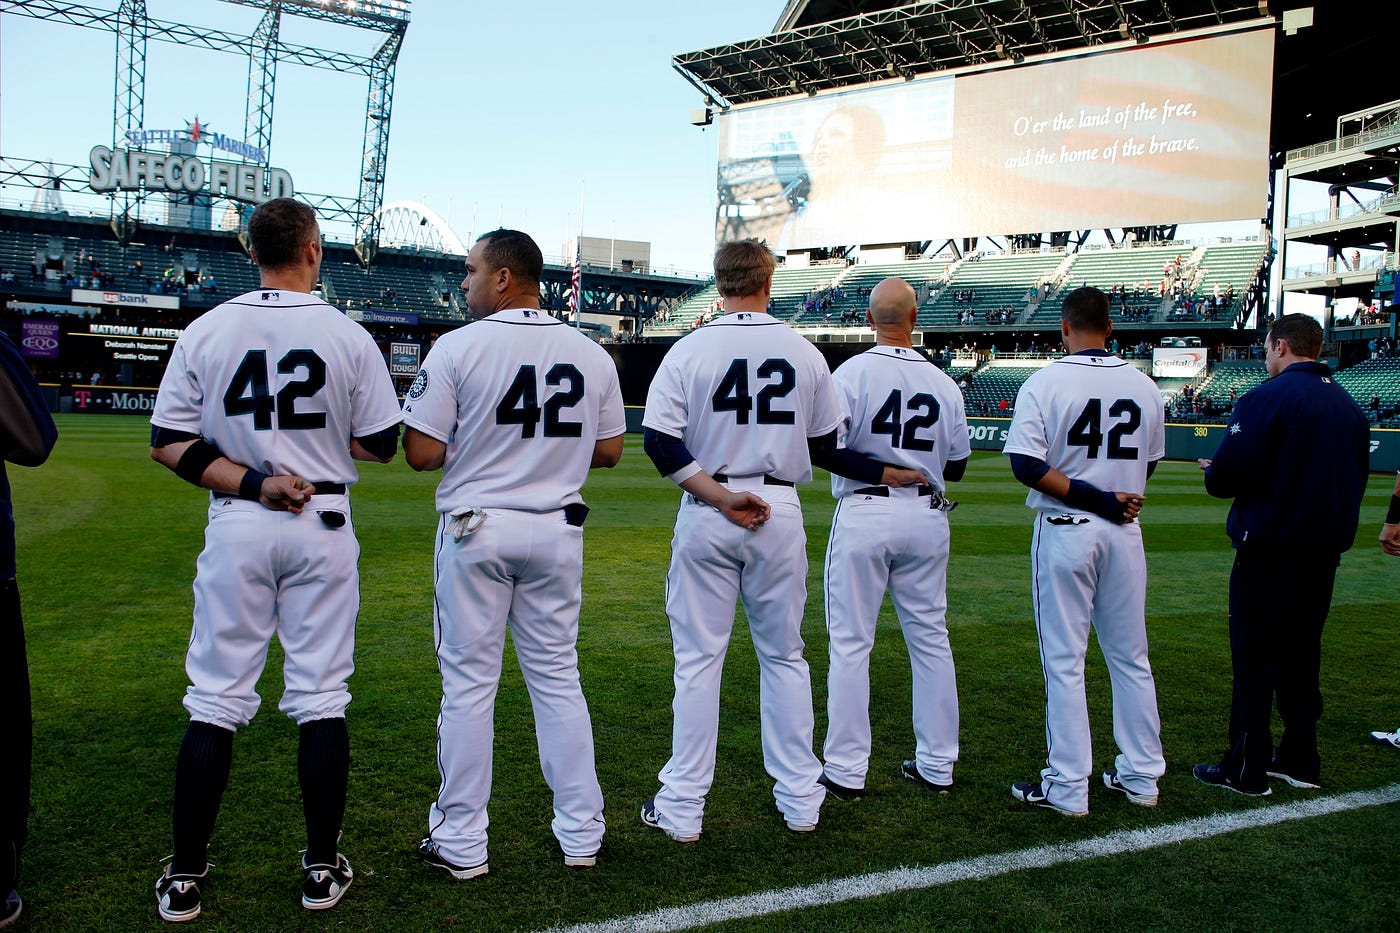 Mariners to Play in MLB's Annual Civil Rights Game on Jackie